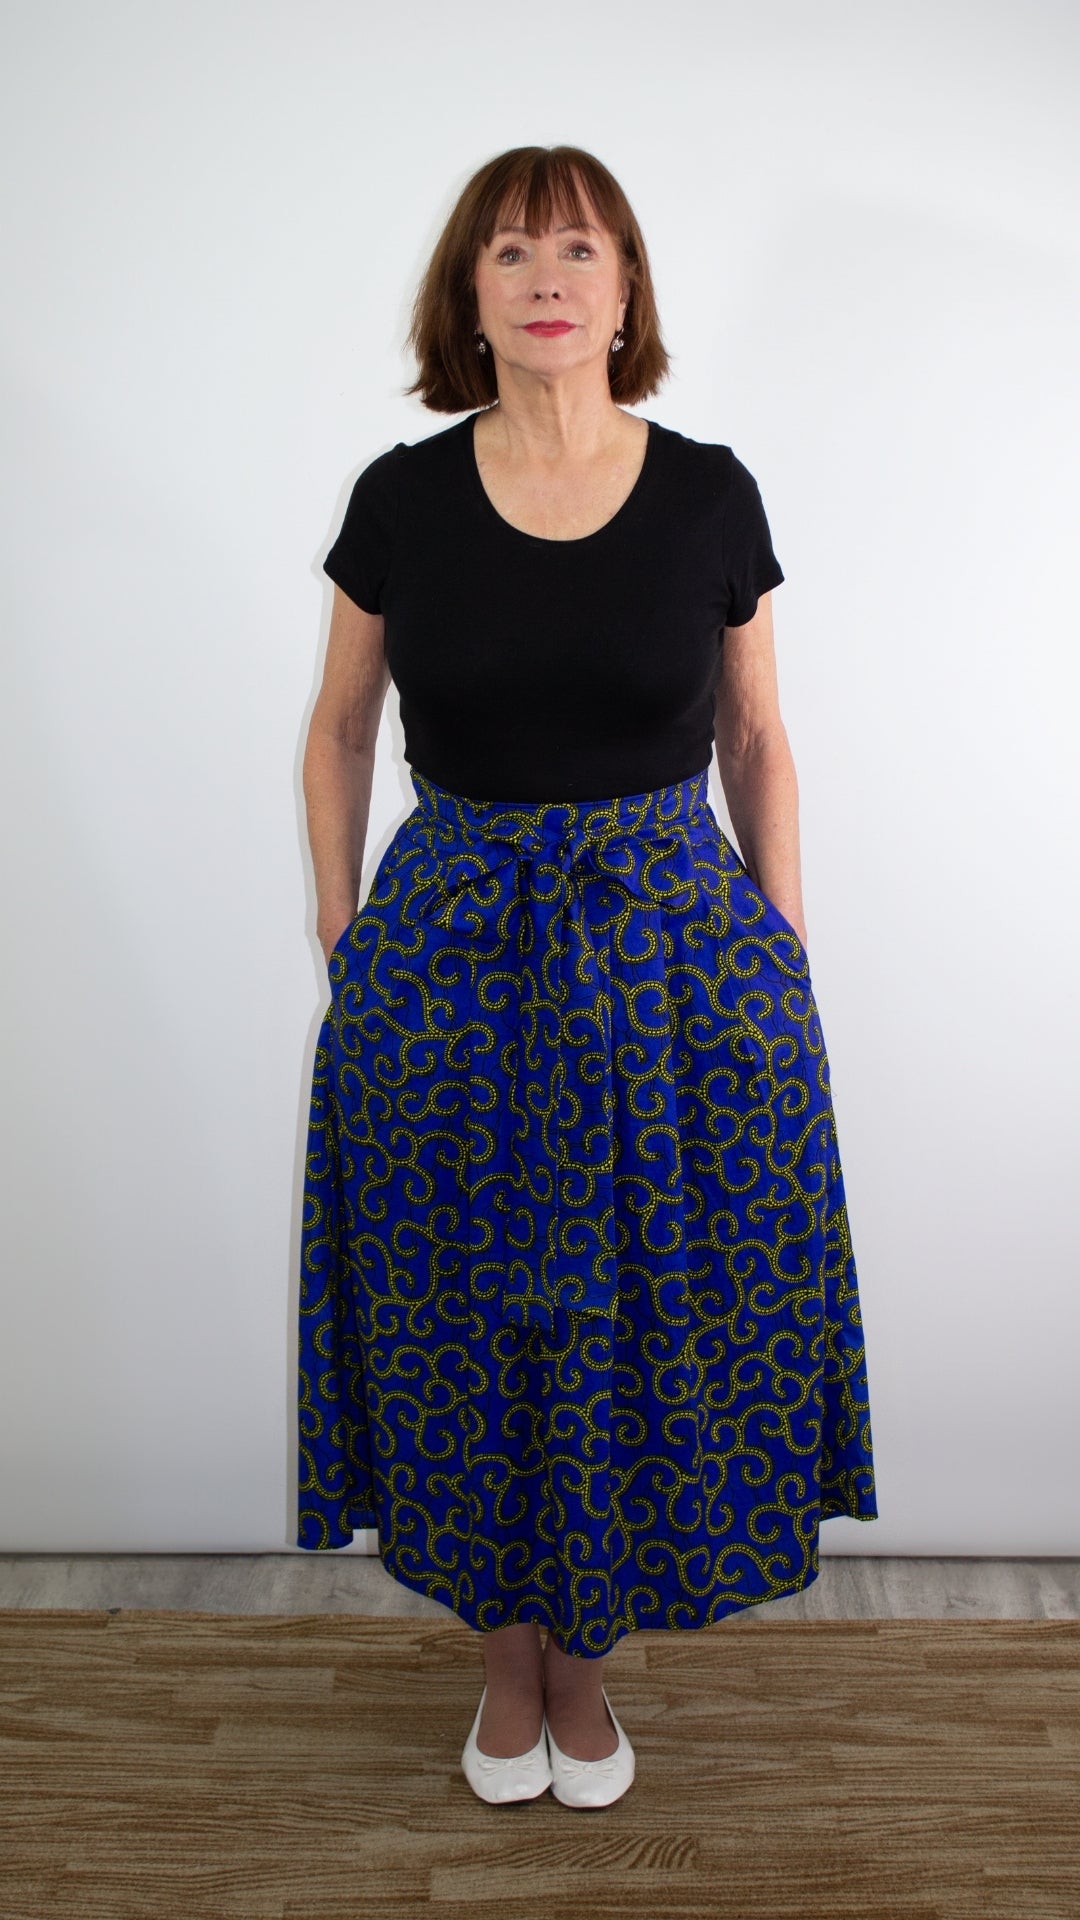 Model posing in a captivating blue swirly skirt adorned with golden elements paired with a chic black shirt. and white ballet flats.